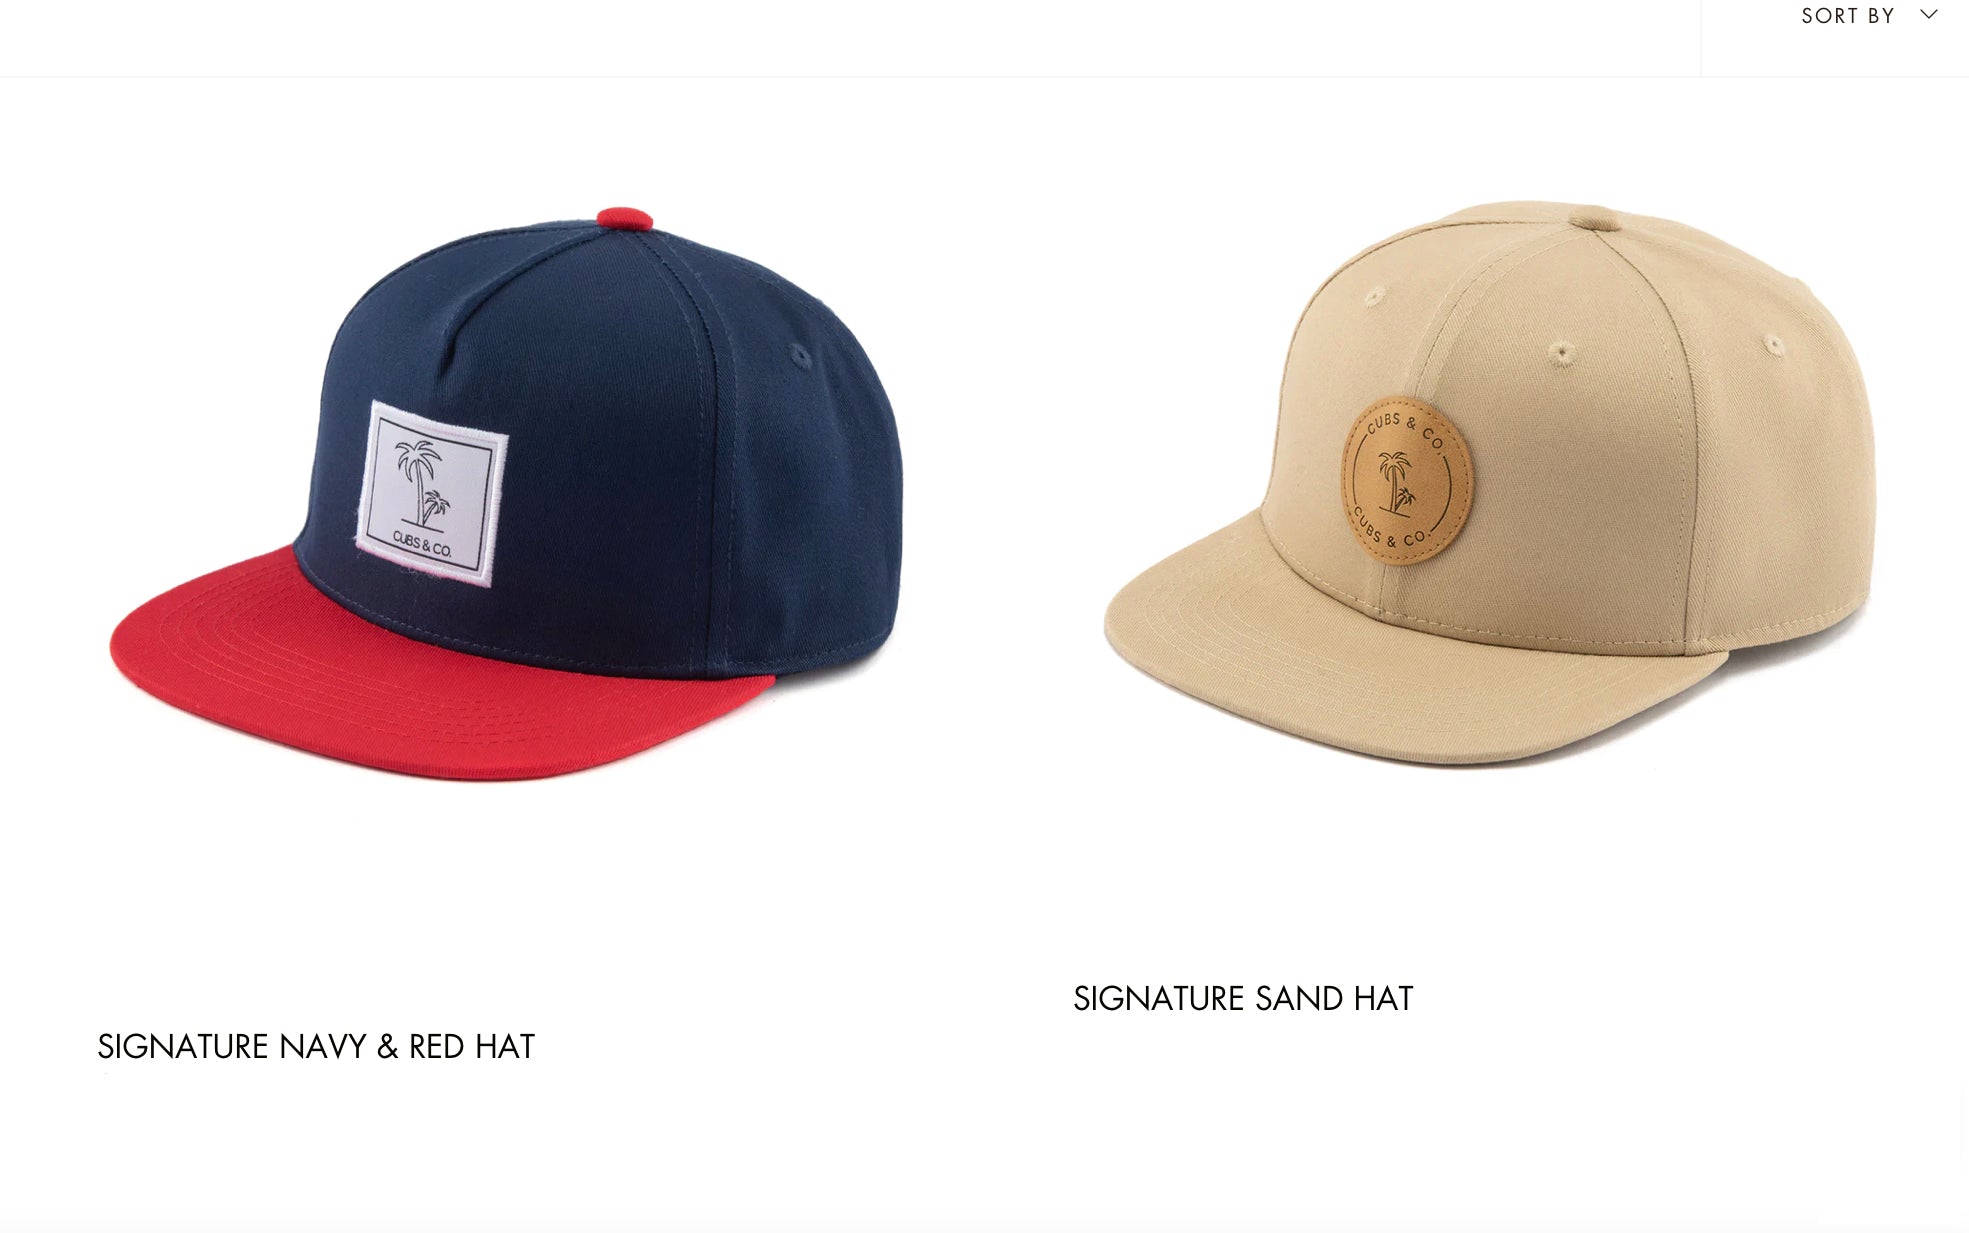 Snapback Hat: size XS, S, M and Adult: navy or sand colour